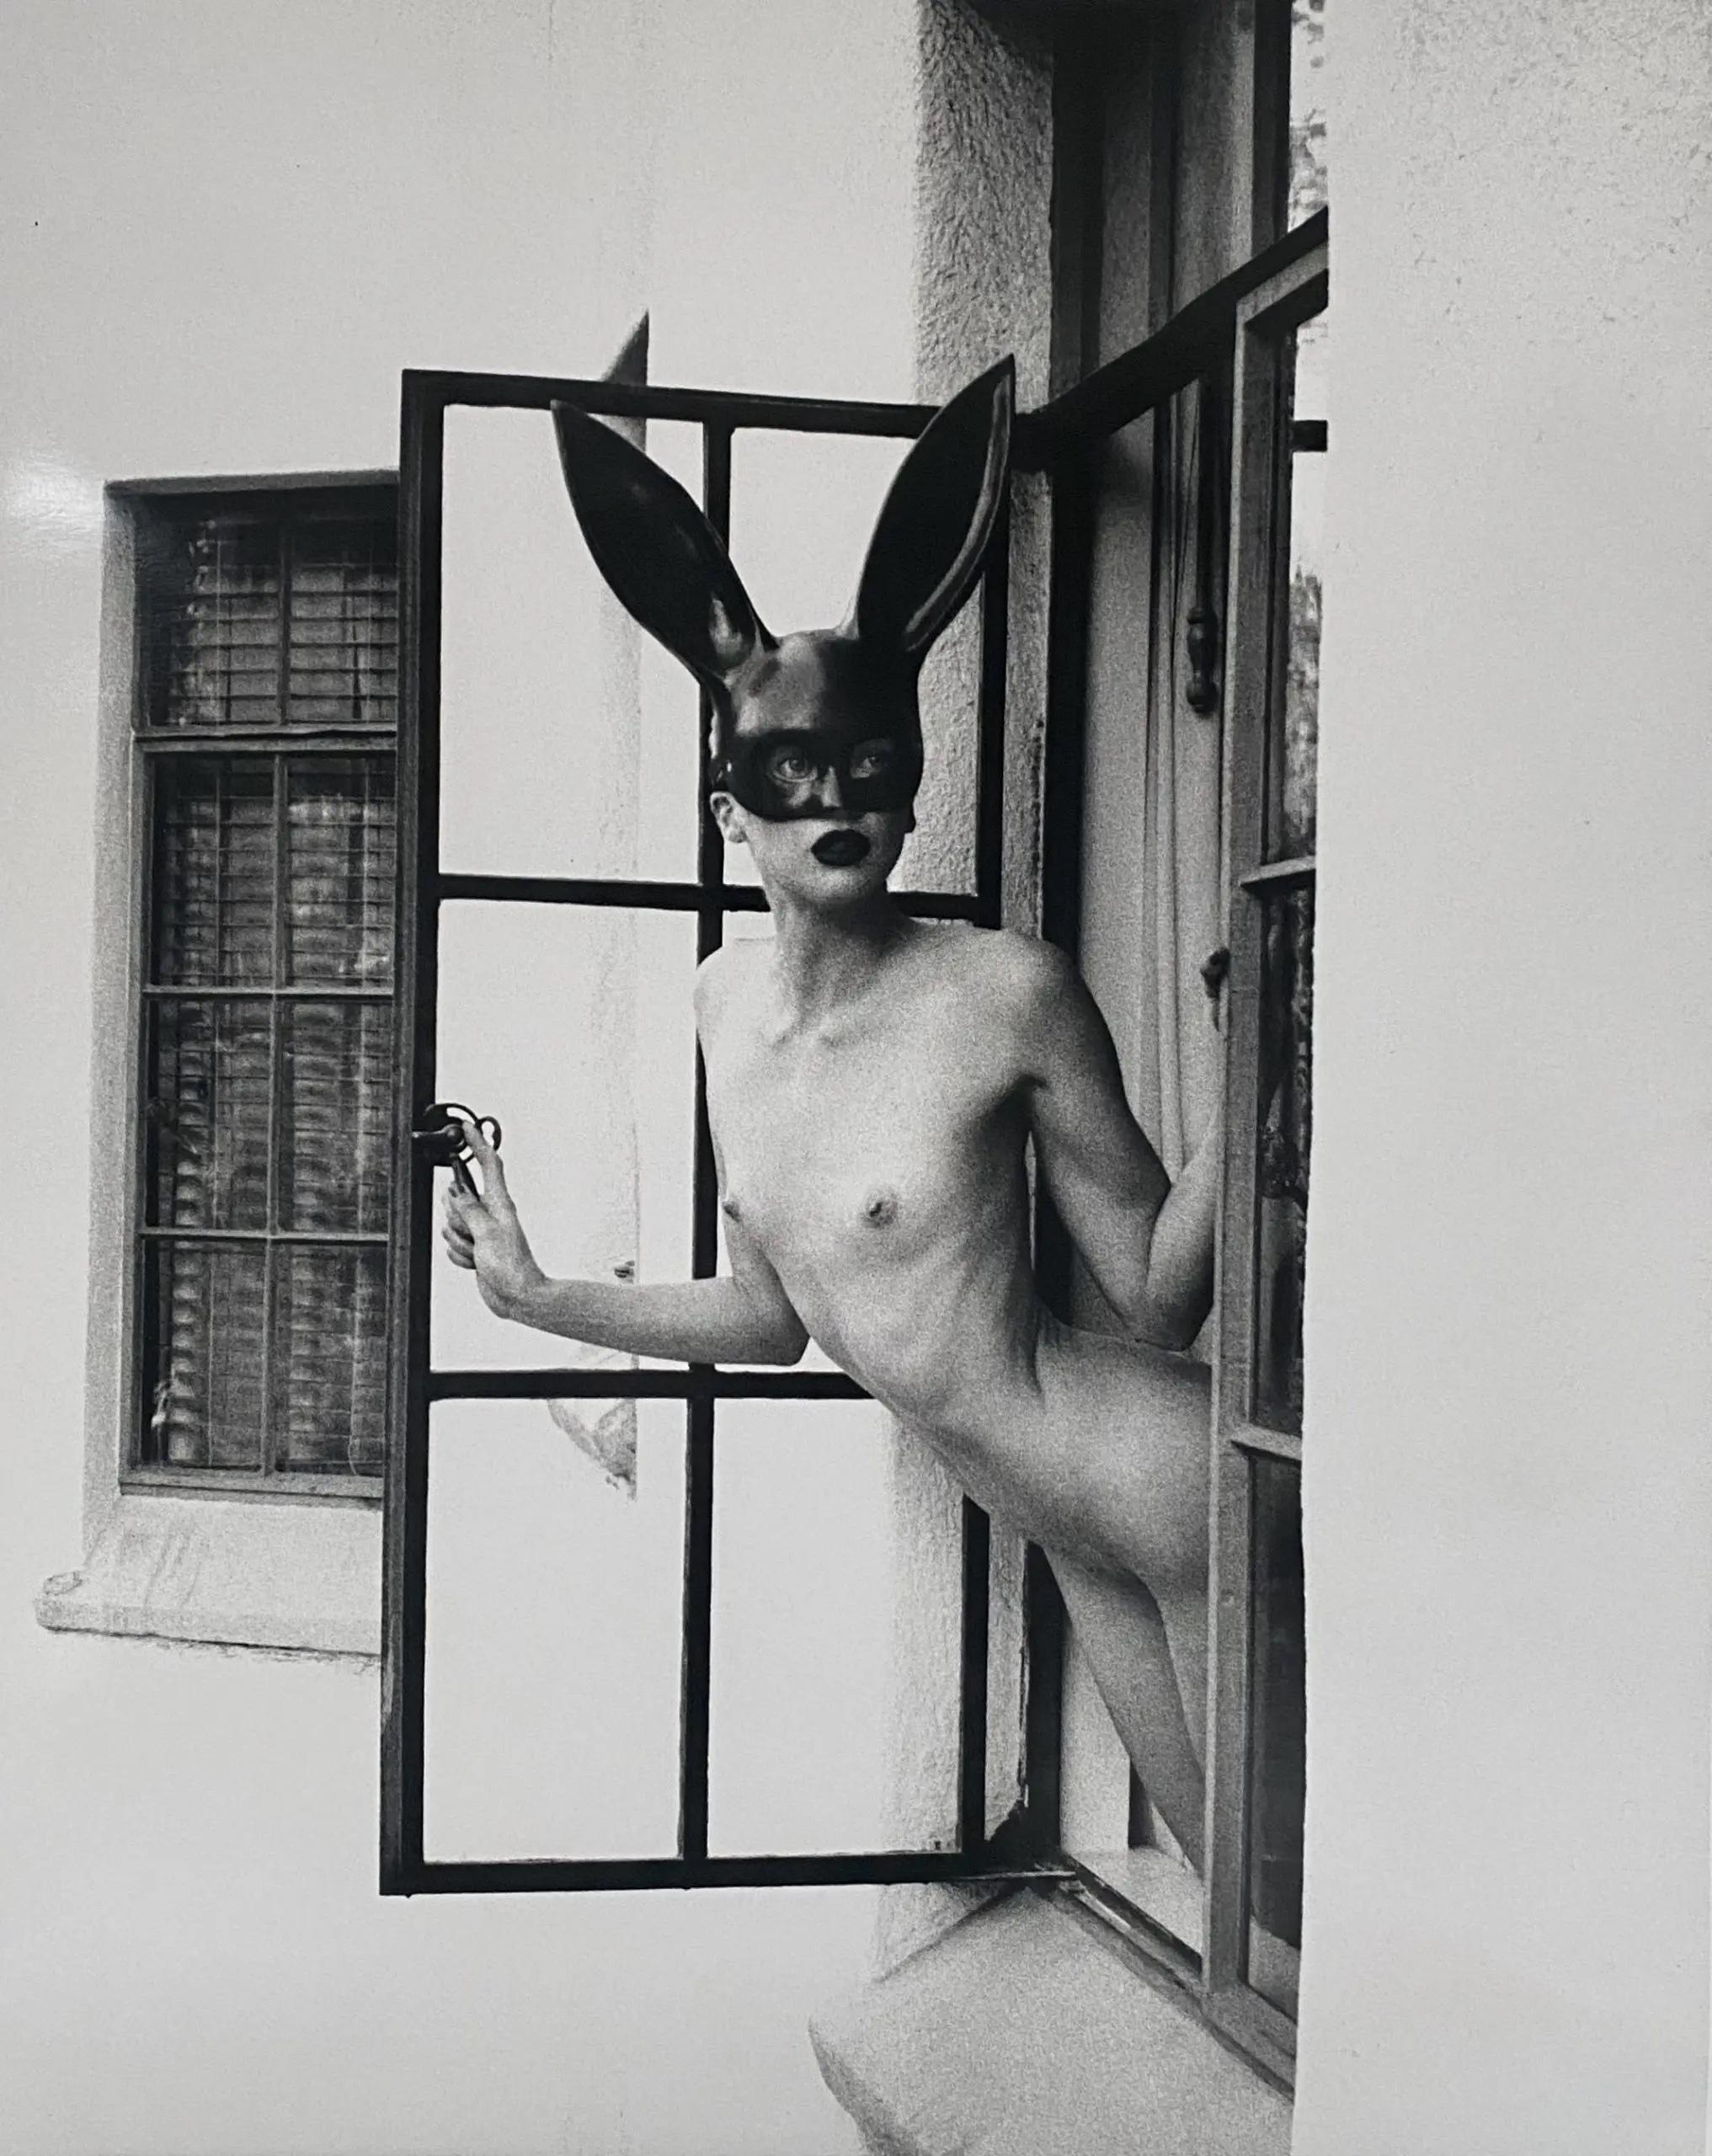 The Bunny In The Window (84" x 63")